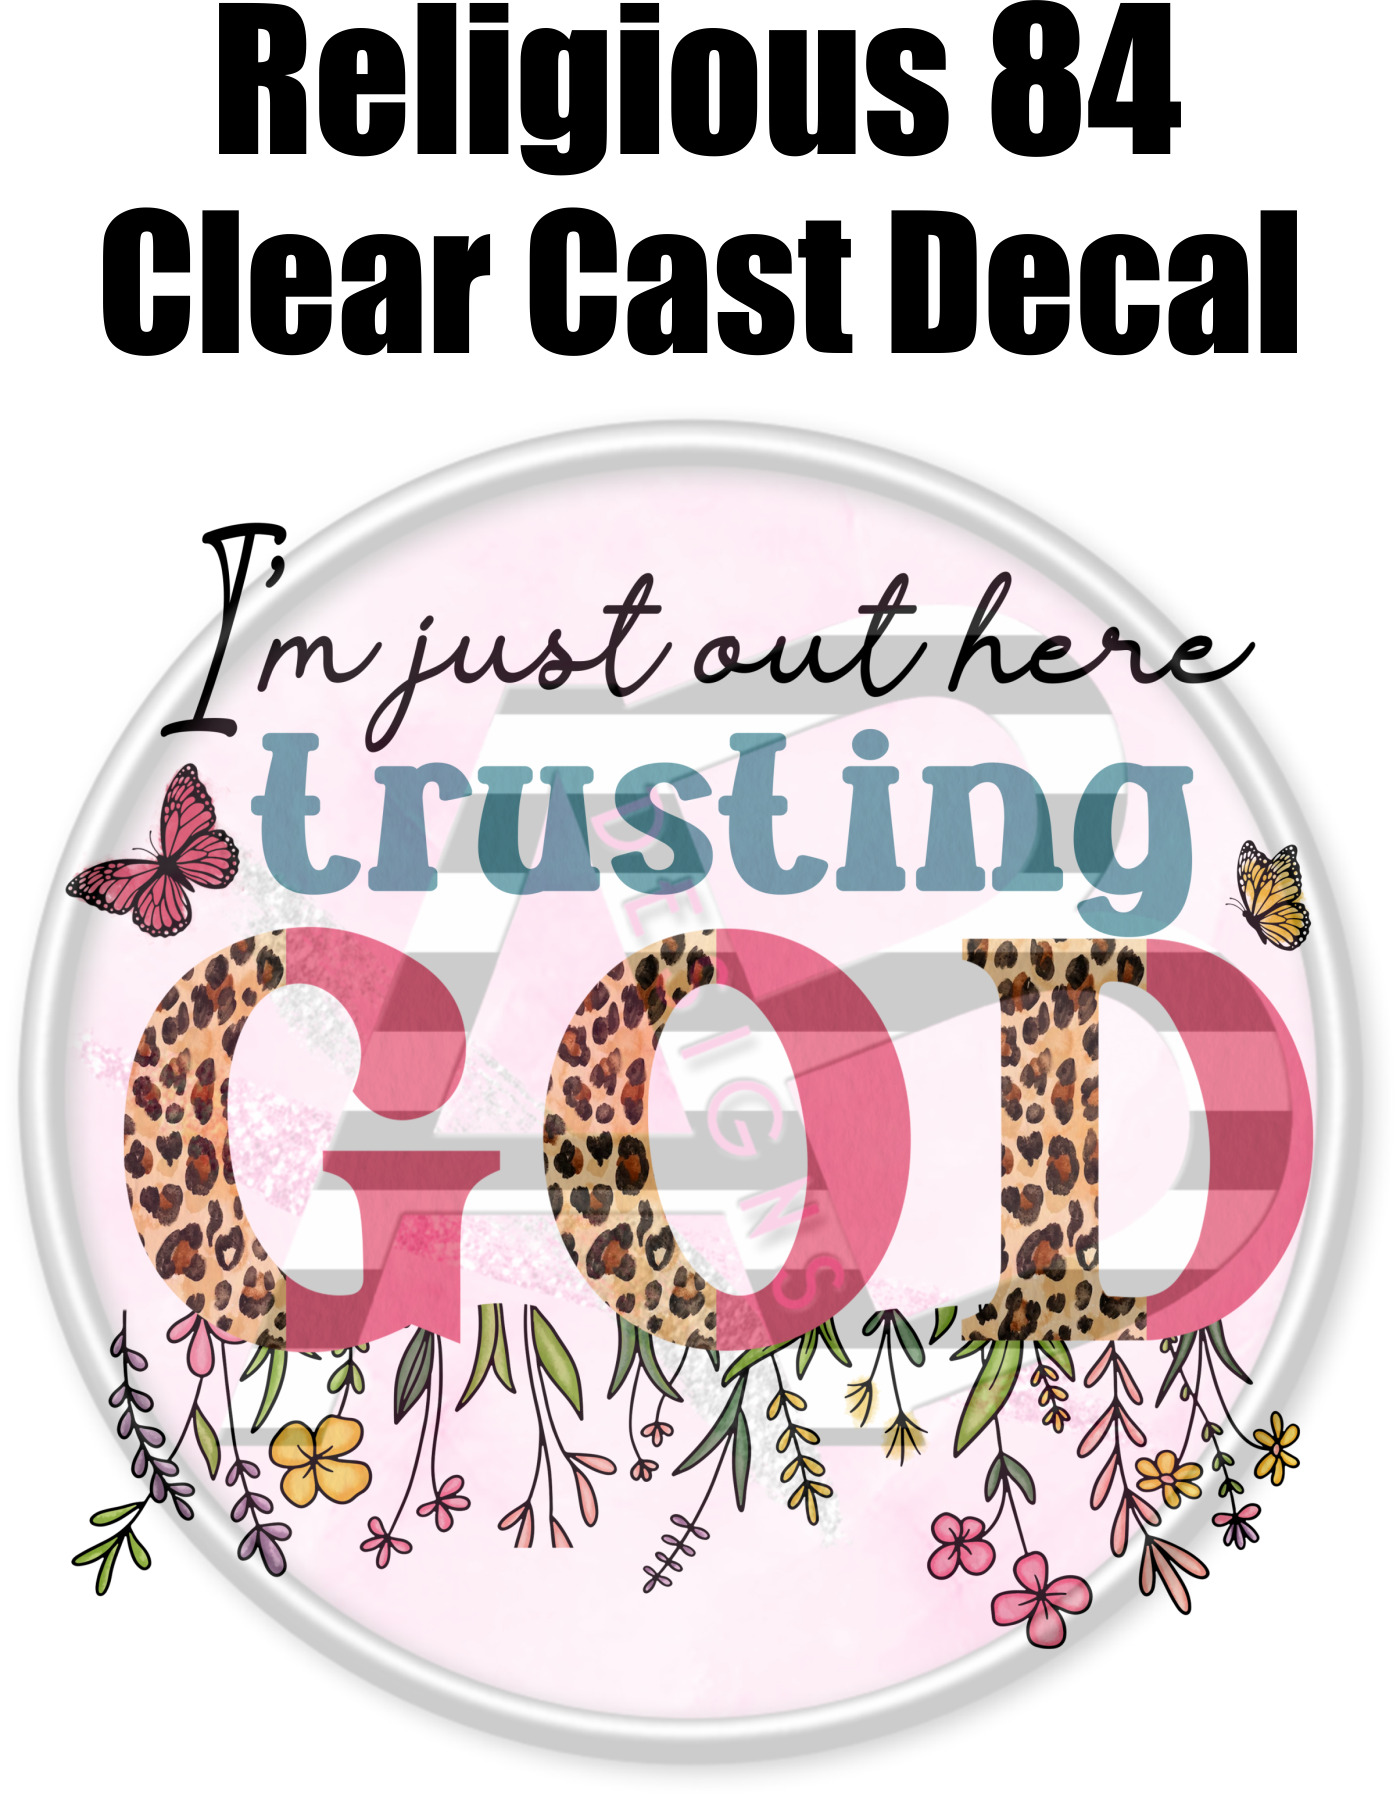 Religious 84 - Clear Cast Decal - 240